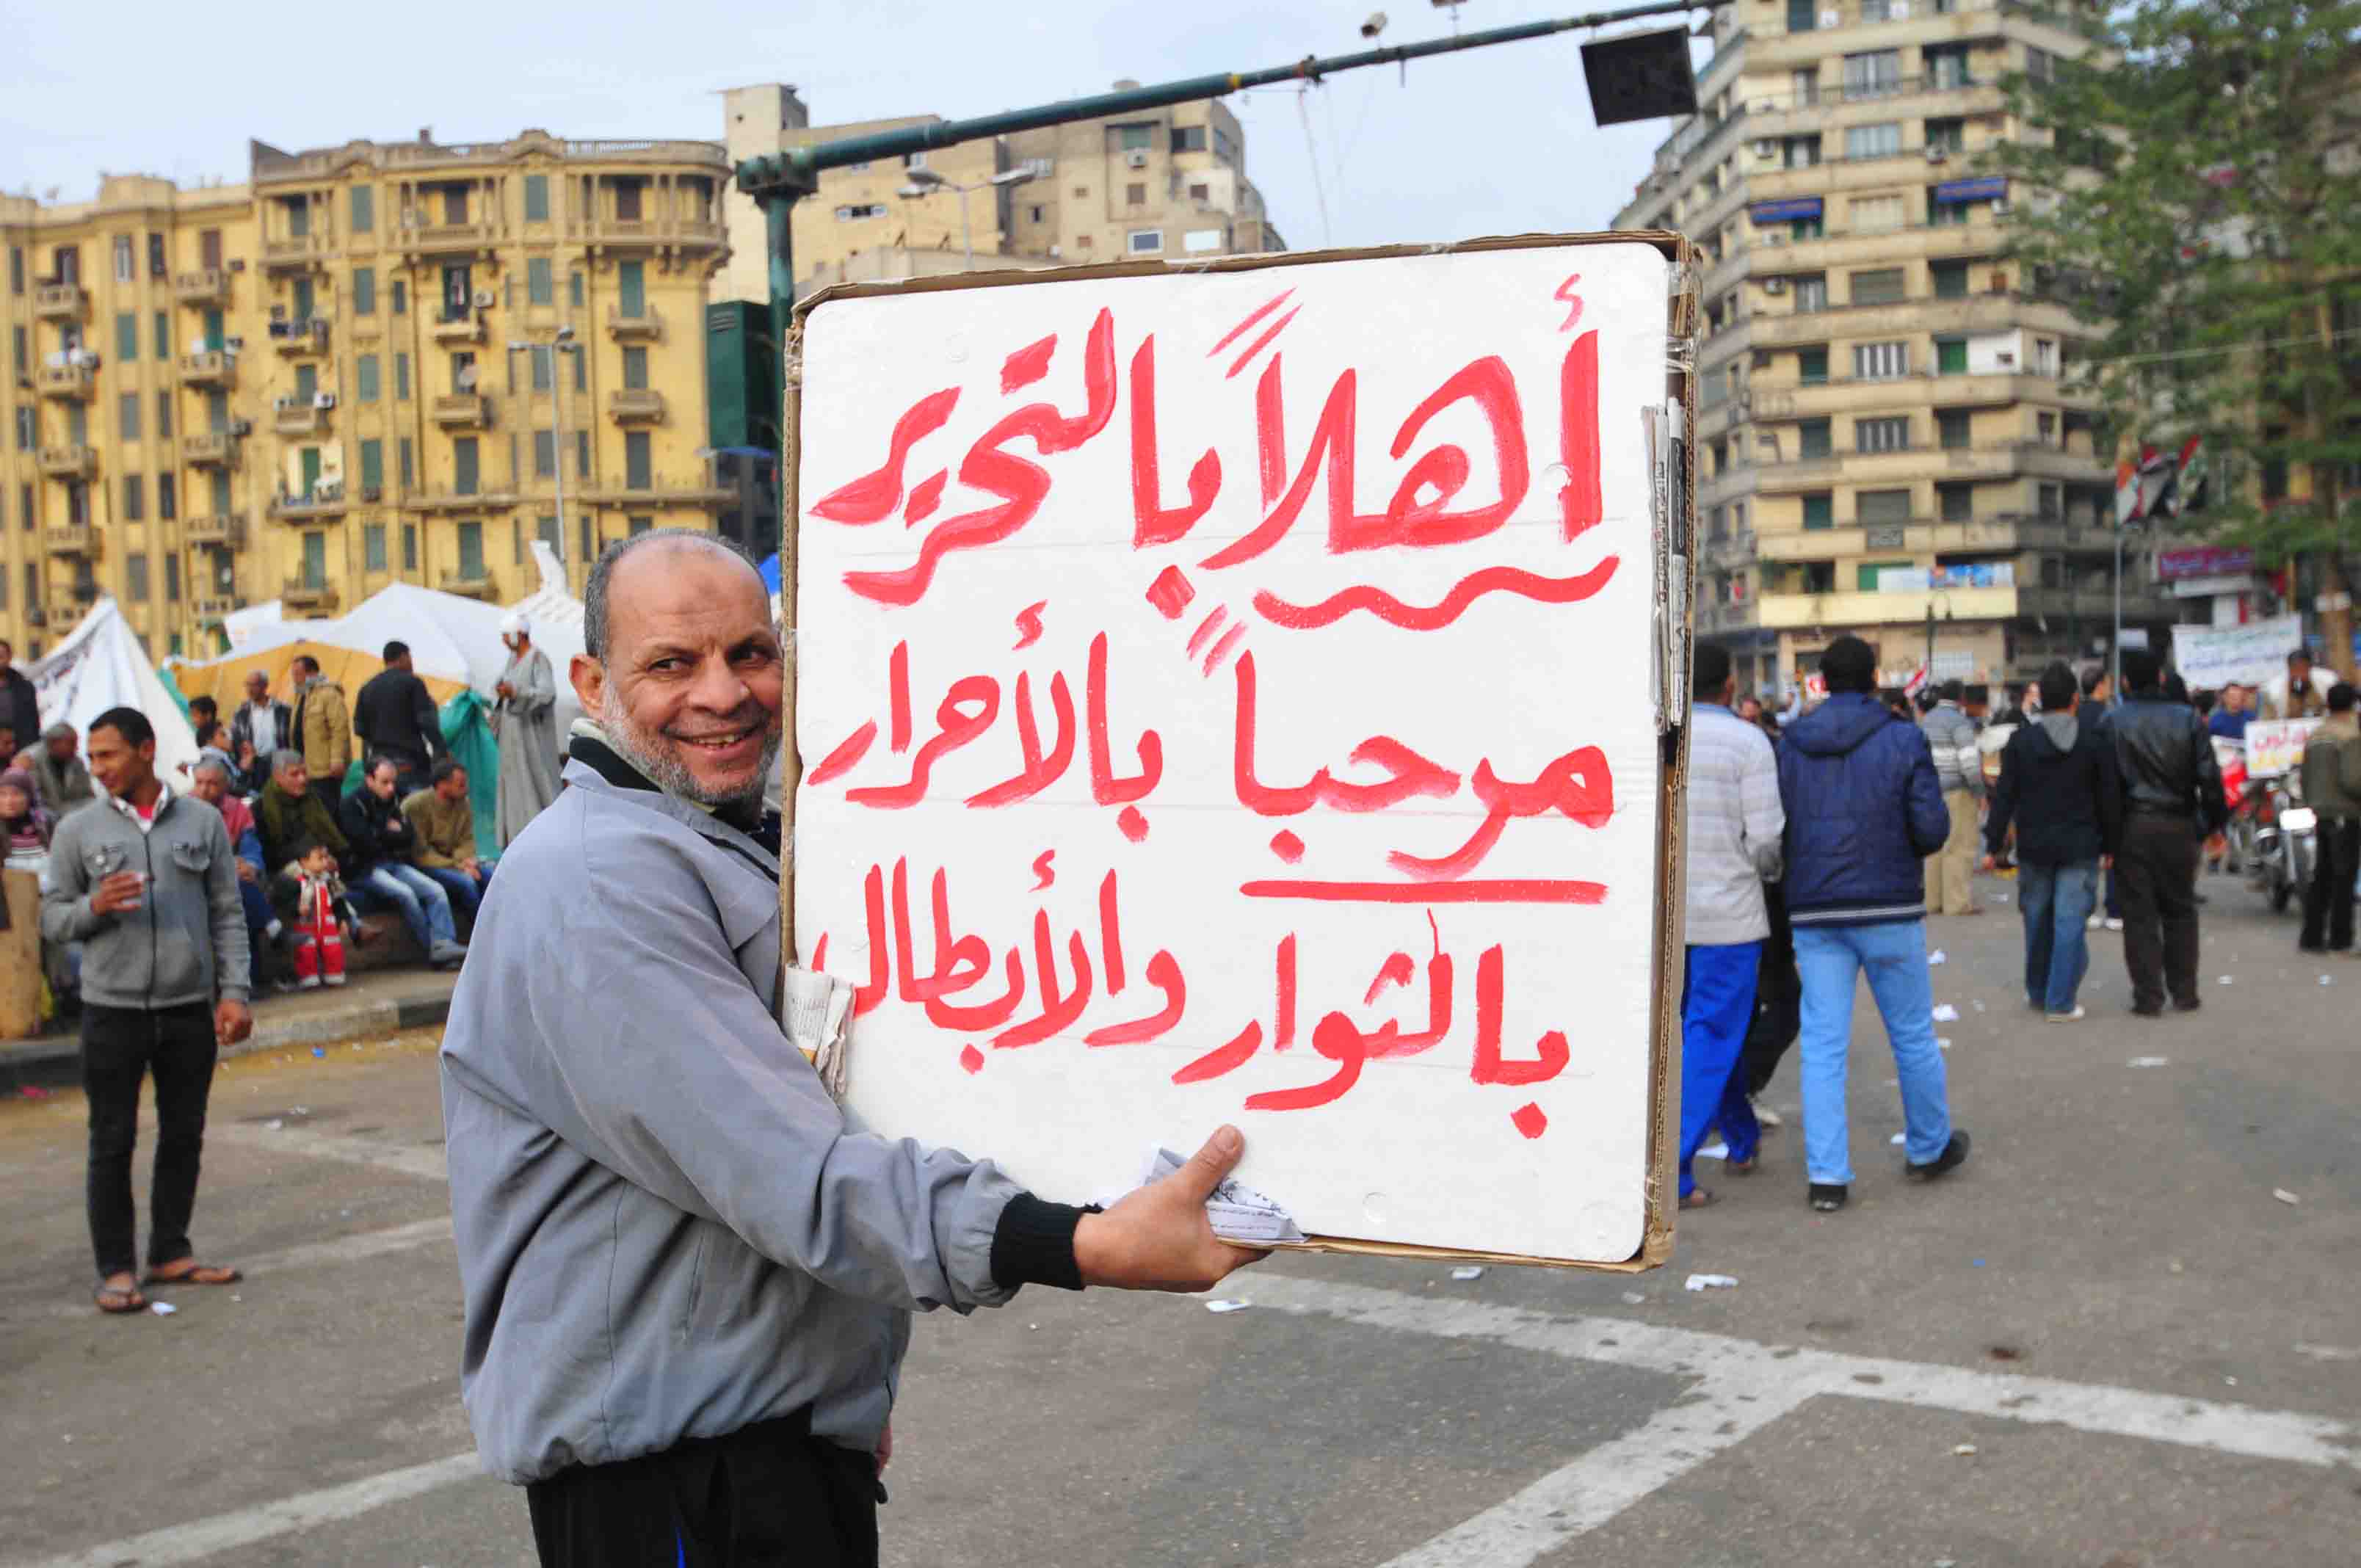 Protesters in Tahrir Square demonstrate against the draft constitution (Photo by Hassan Ibrahim)